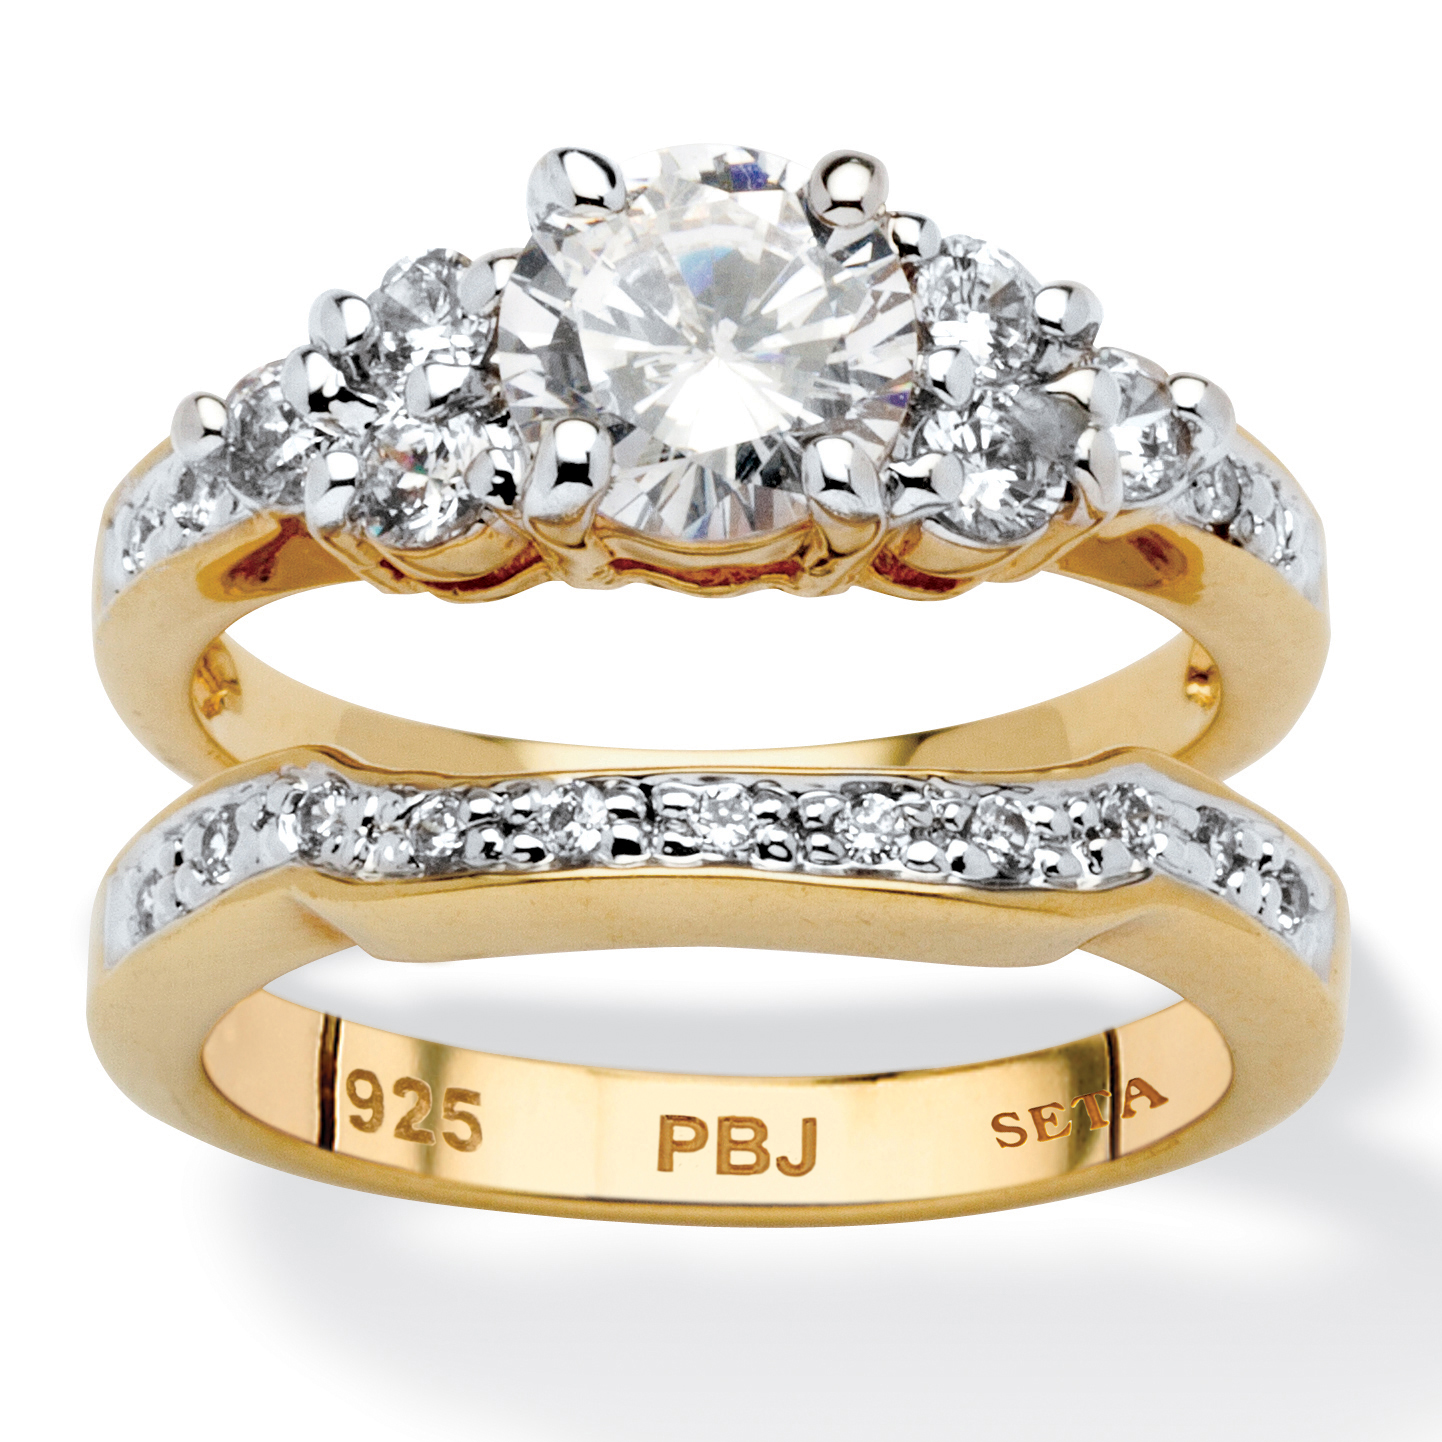 PalmBeach Jewelry 2 Piece 2.01 TCW Round Cubic Zirconia Bridal Ring Set in 18k Gold-Plated